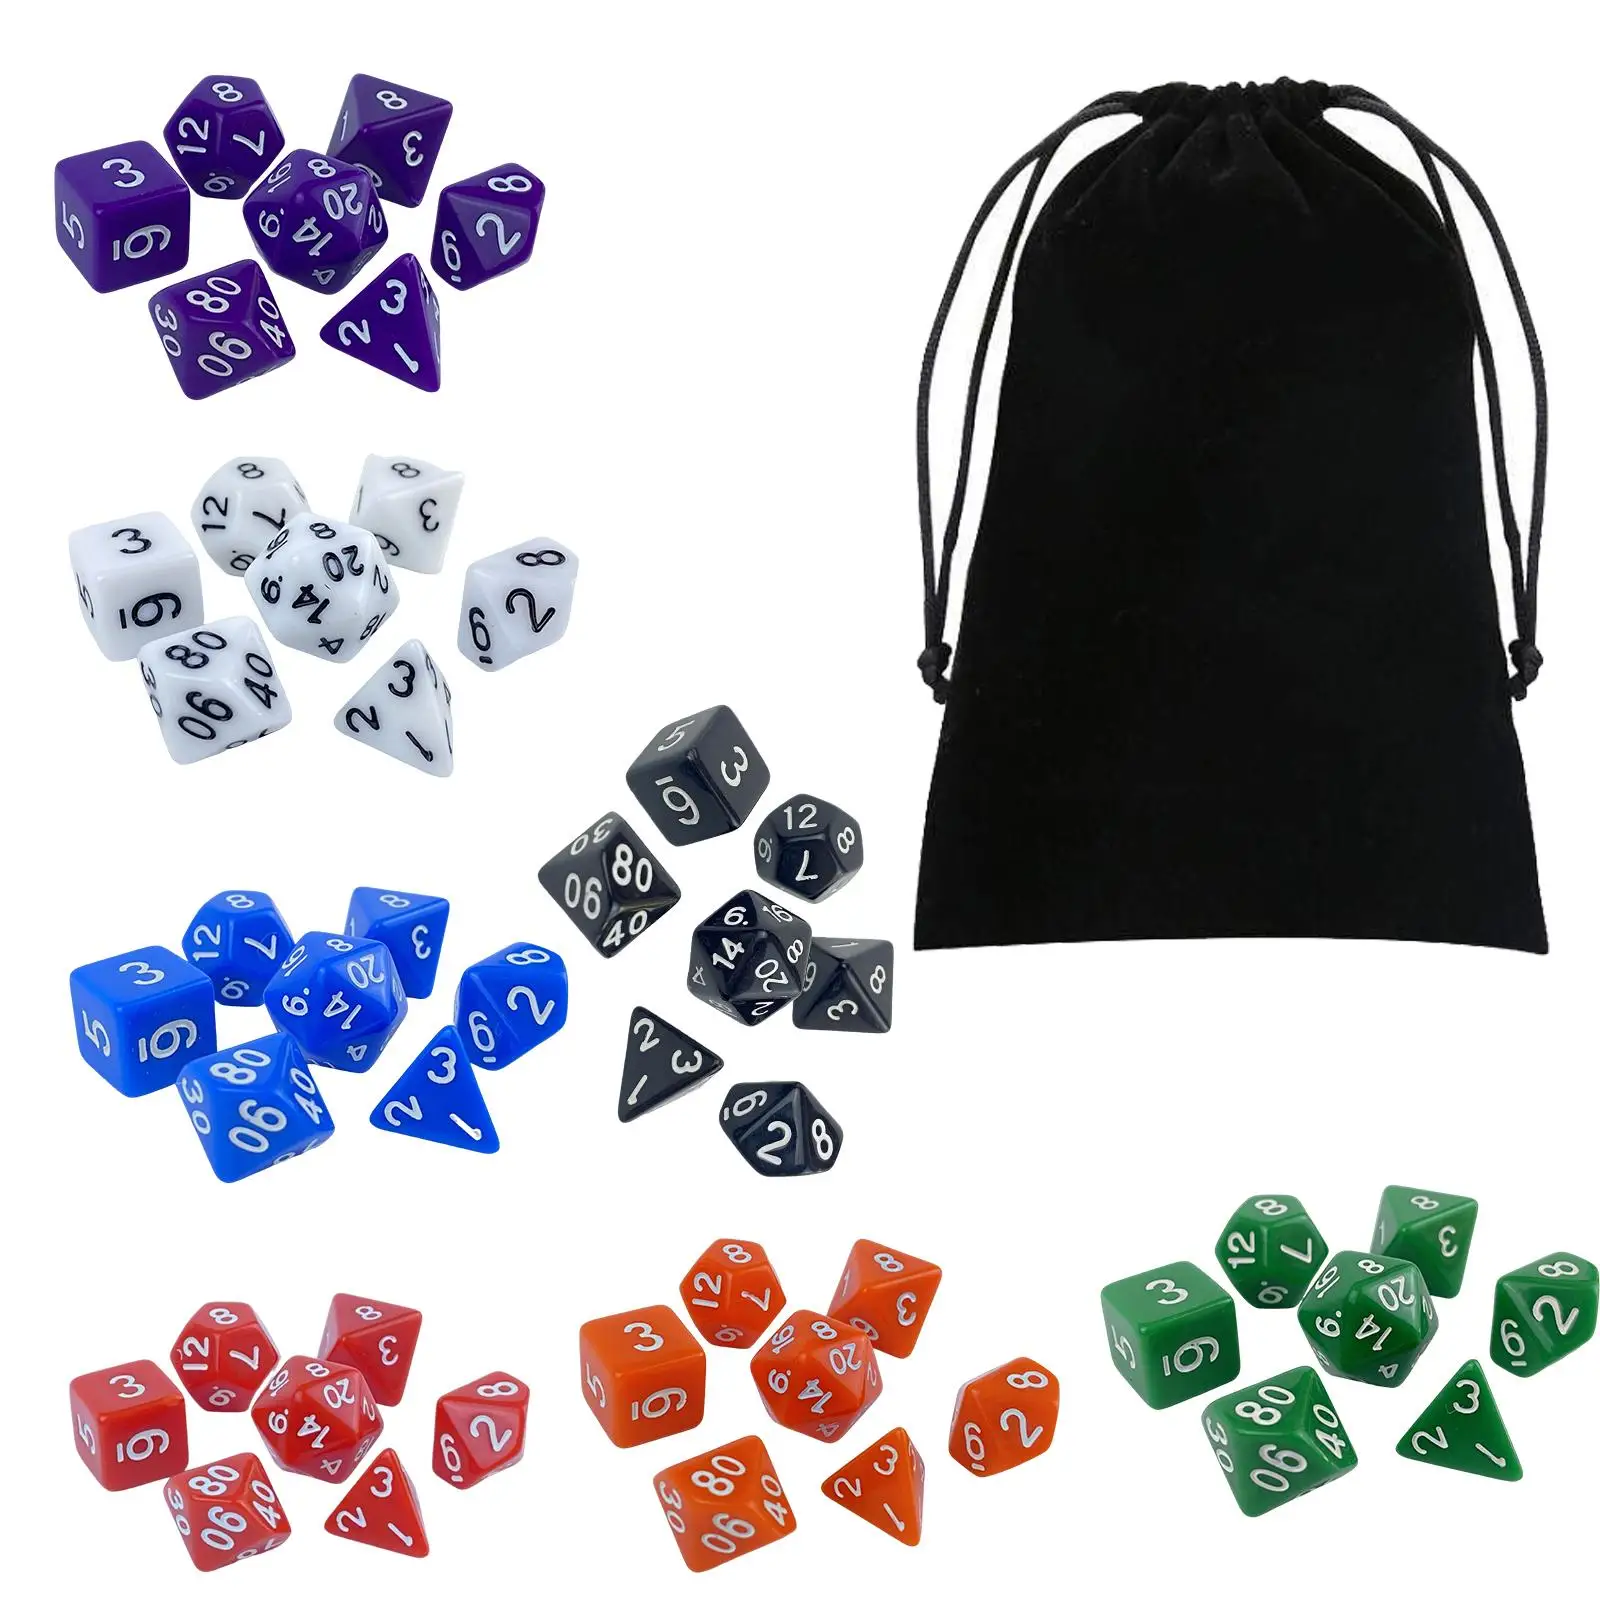 

70 Pieces Polyhedral Dice D4 D6 D8 D10 D12 D20 Acrylic Multi Sided Dices Role Playing Party Favors for RPG DnD Table Board Games